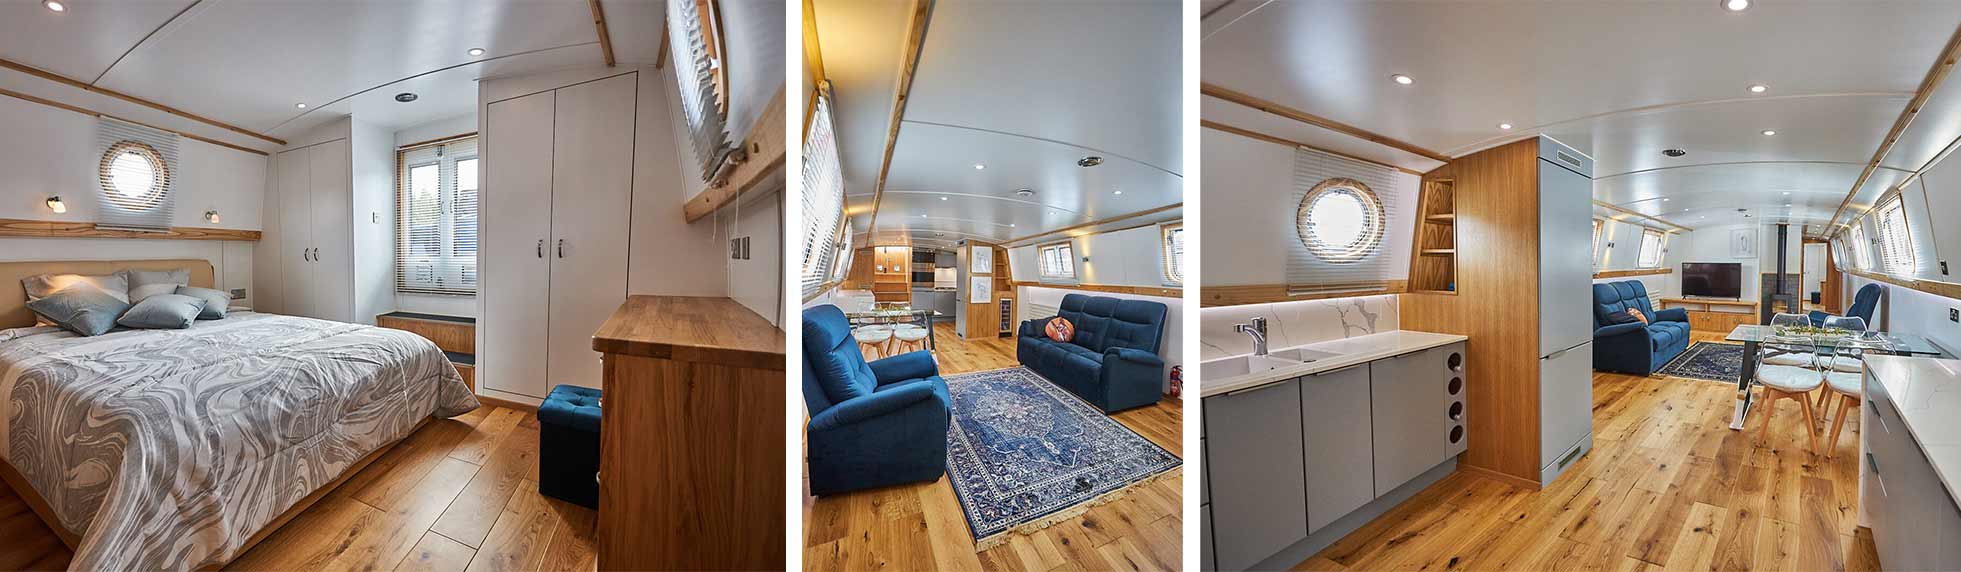 Viking Canal Boat wide beam 70 12 06 interiors